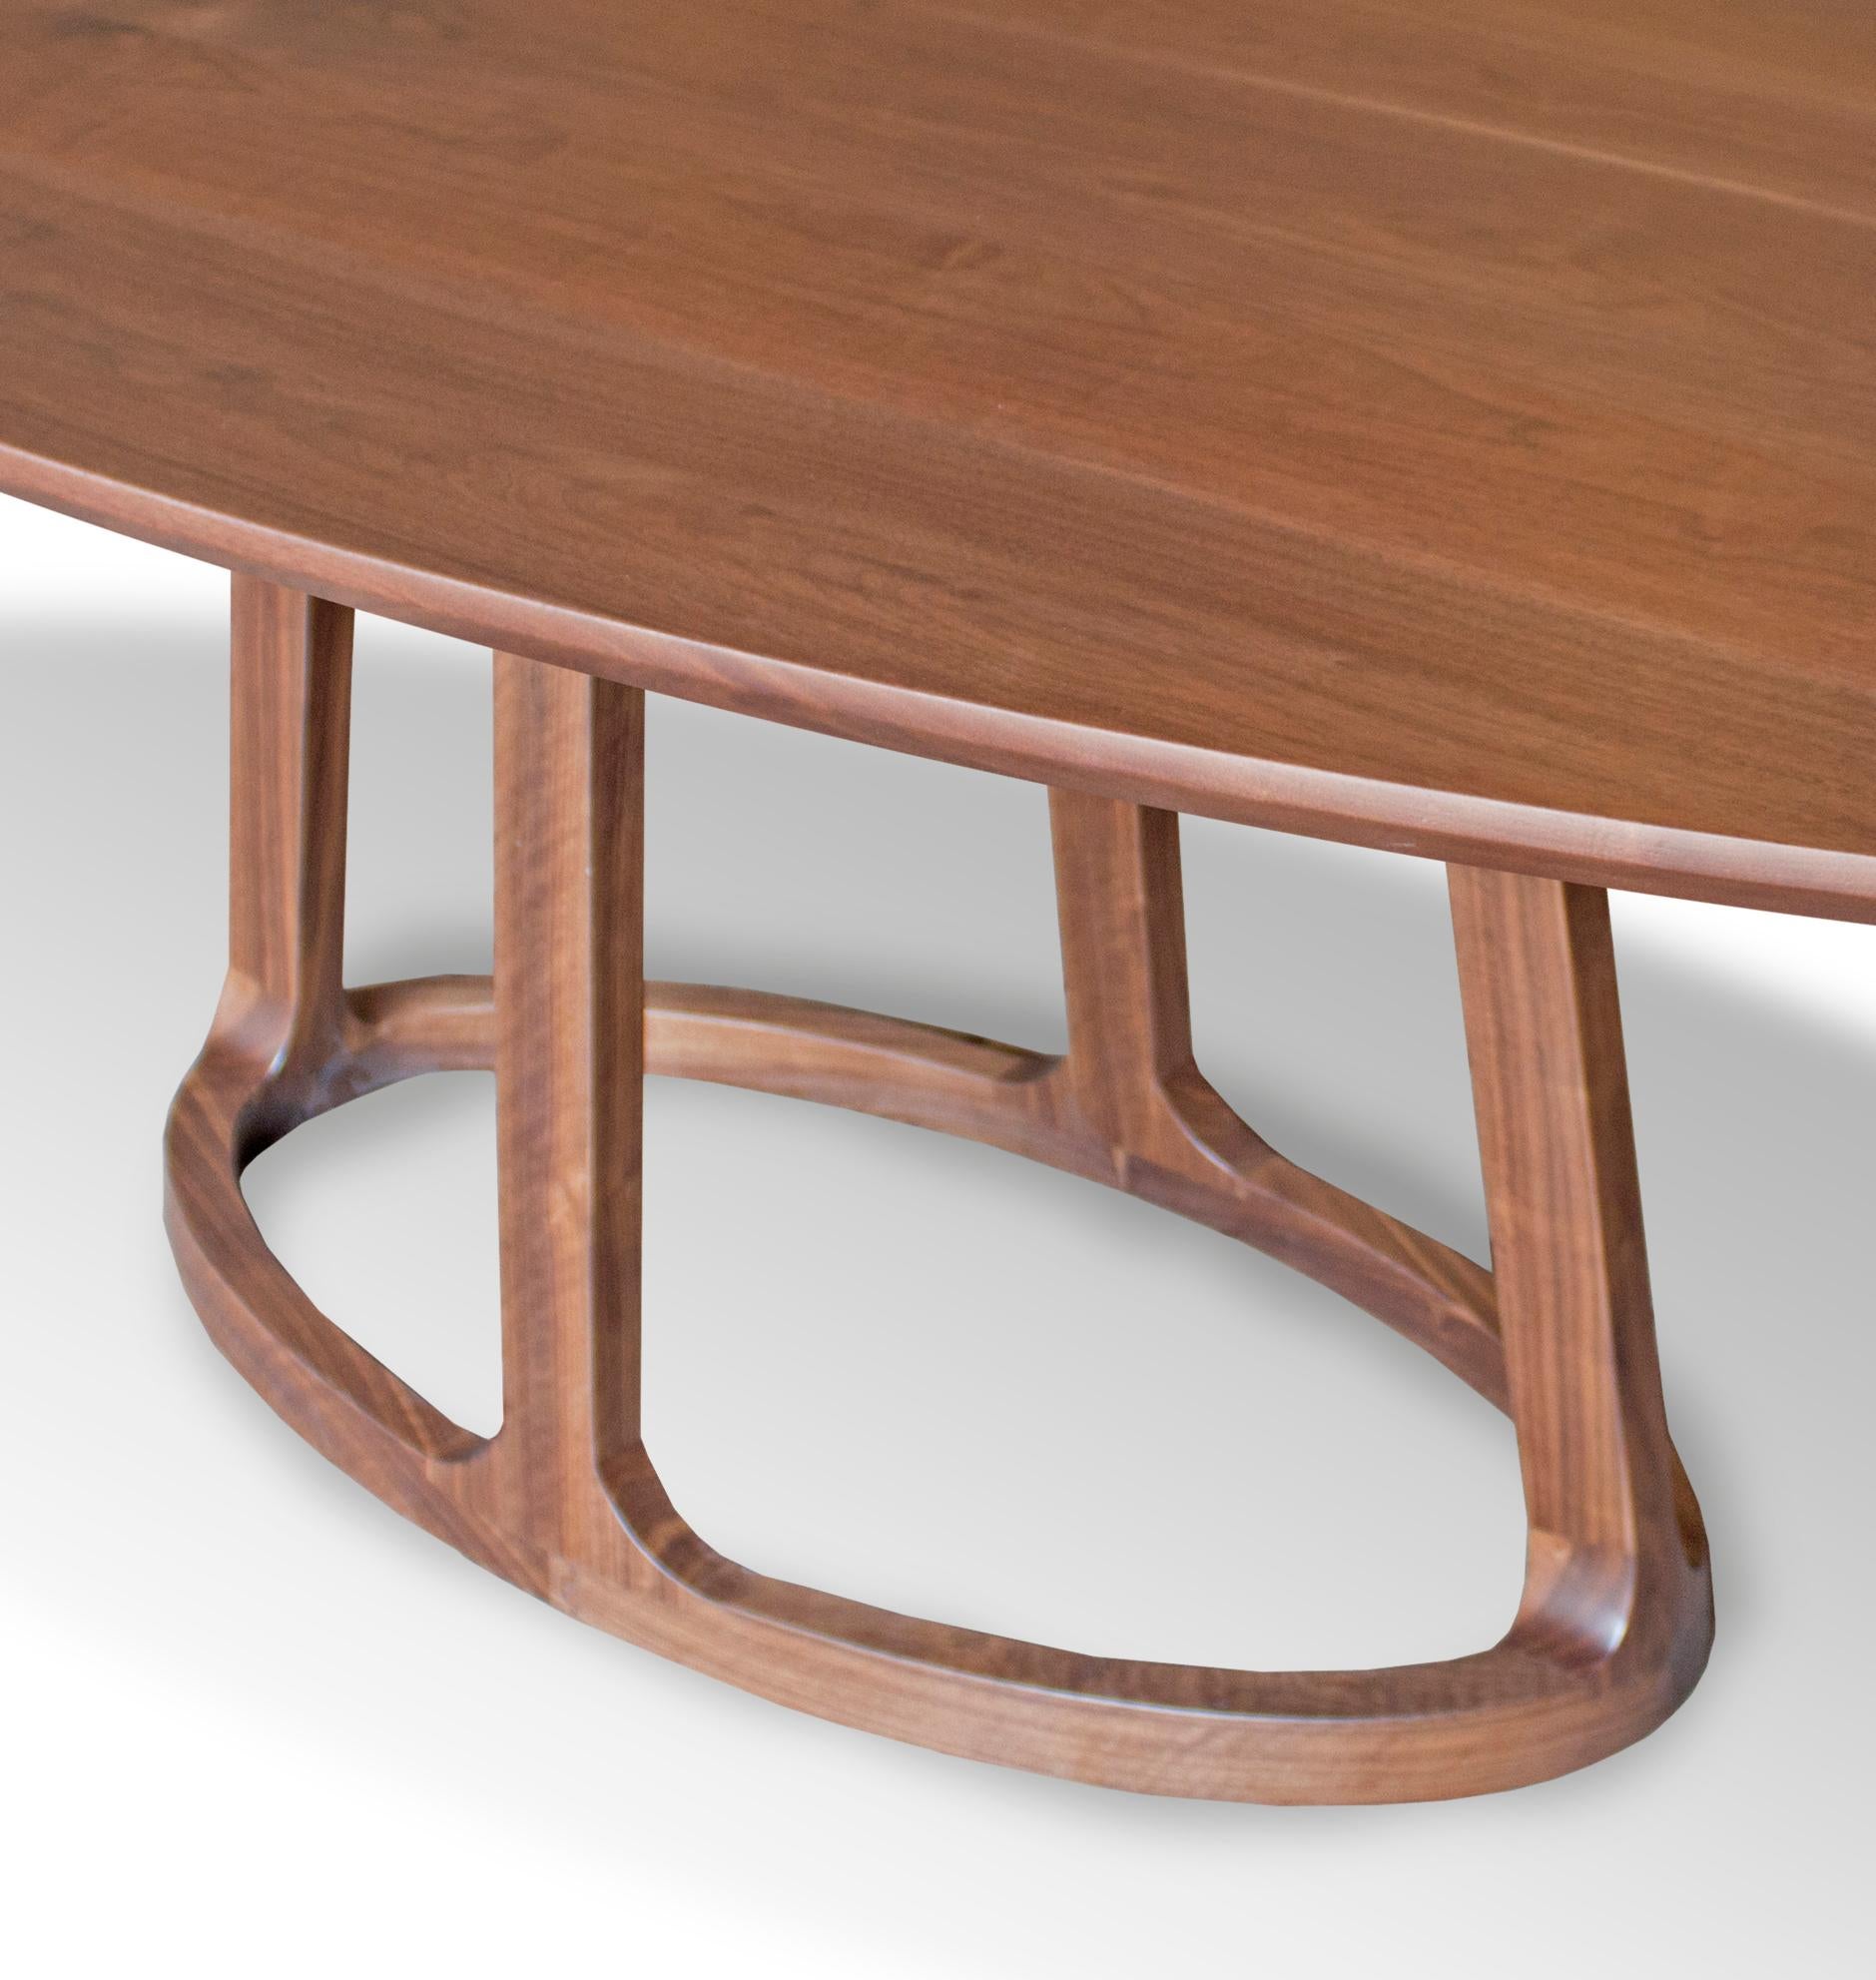 This inviting elyptical dining table is carved from solid American Black Walnut. Its unique pedestal base gives this table a simple handcrafted elegance that will bring authenticity to any space in which it calls home.